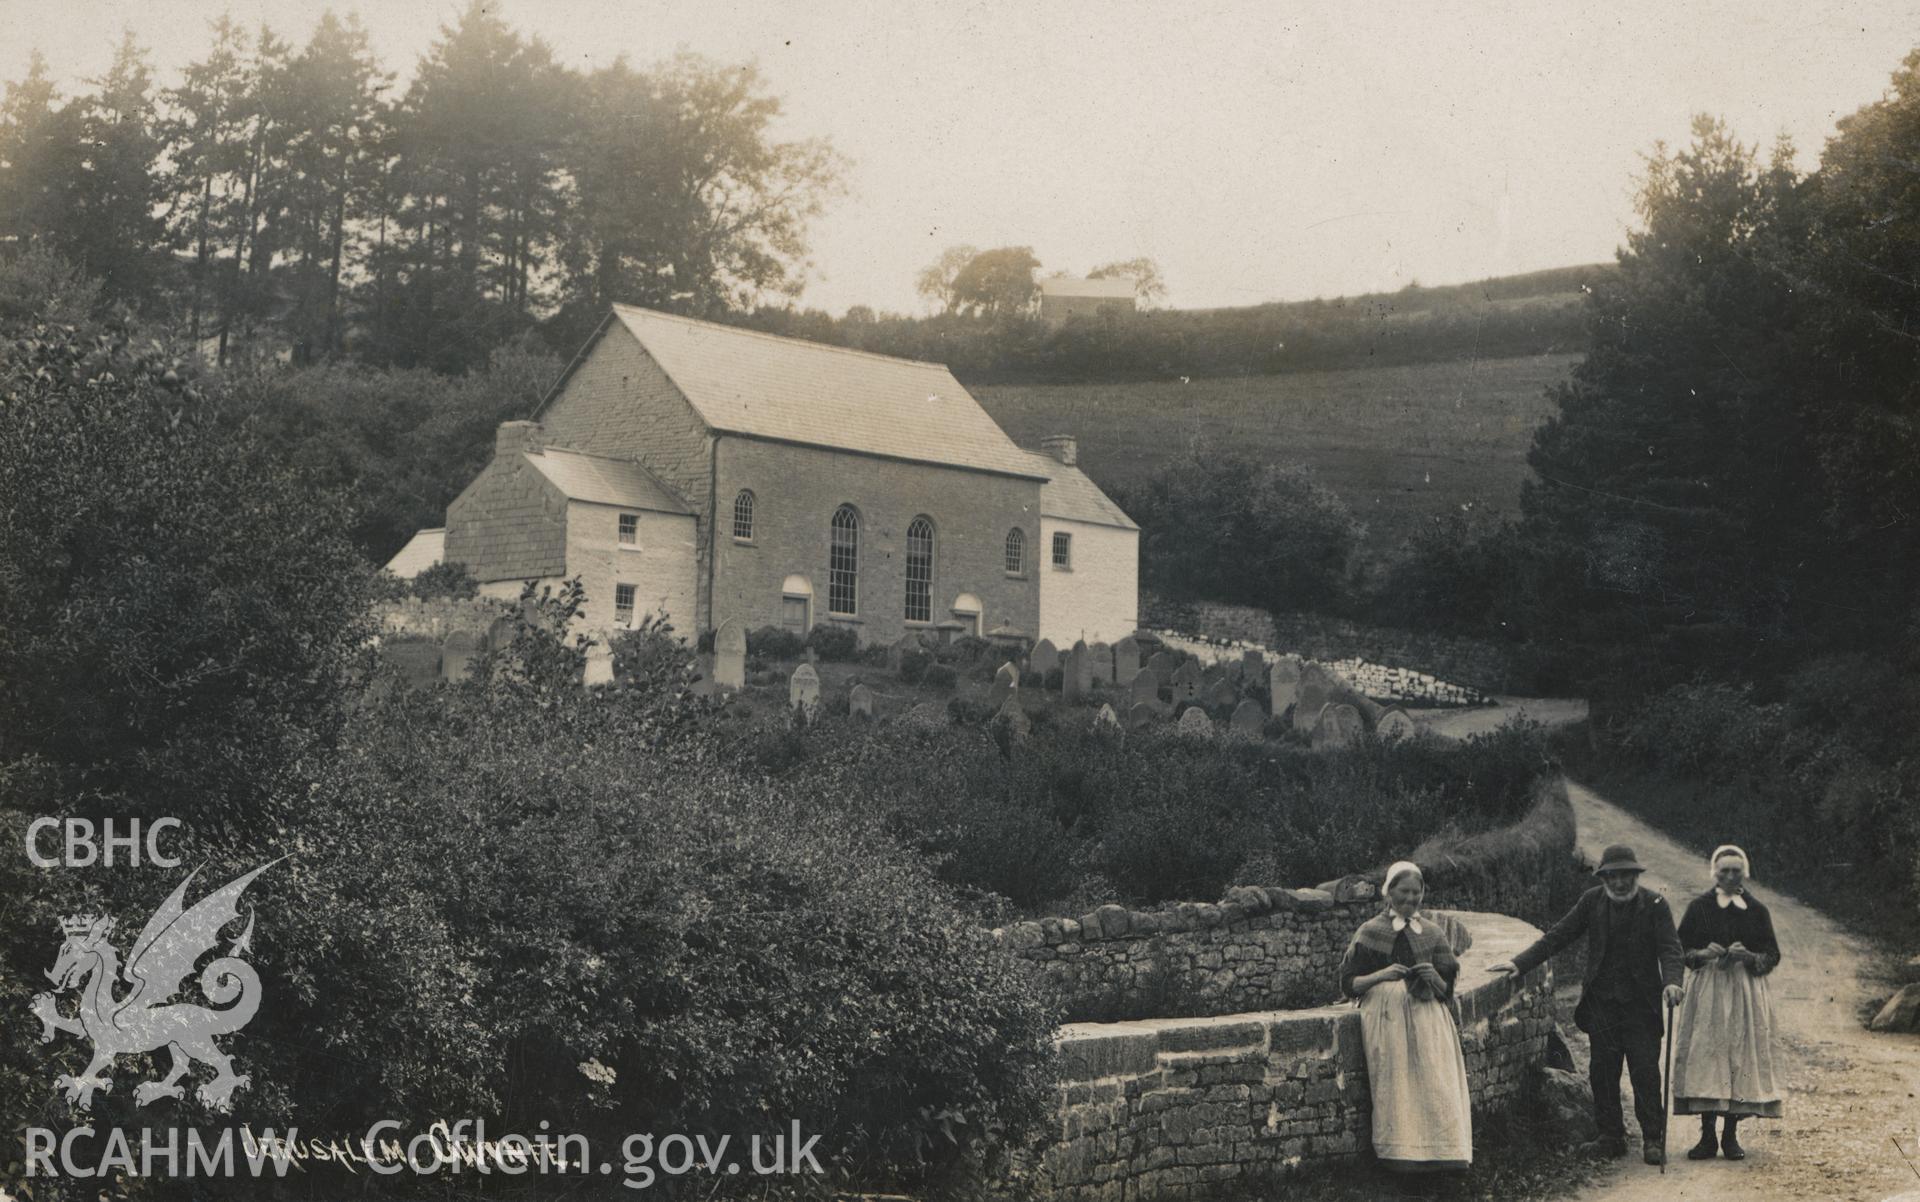 Digital copy of monochrome postcard showing exterior view and graveyard of Jerwsalem Welsh Independent chapel, Llangadog, with two women and a man in the foreground. Loaned for copying by Thomas Lloyd.